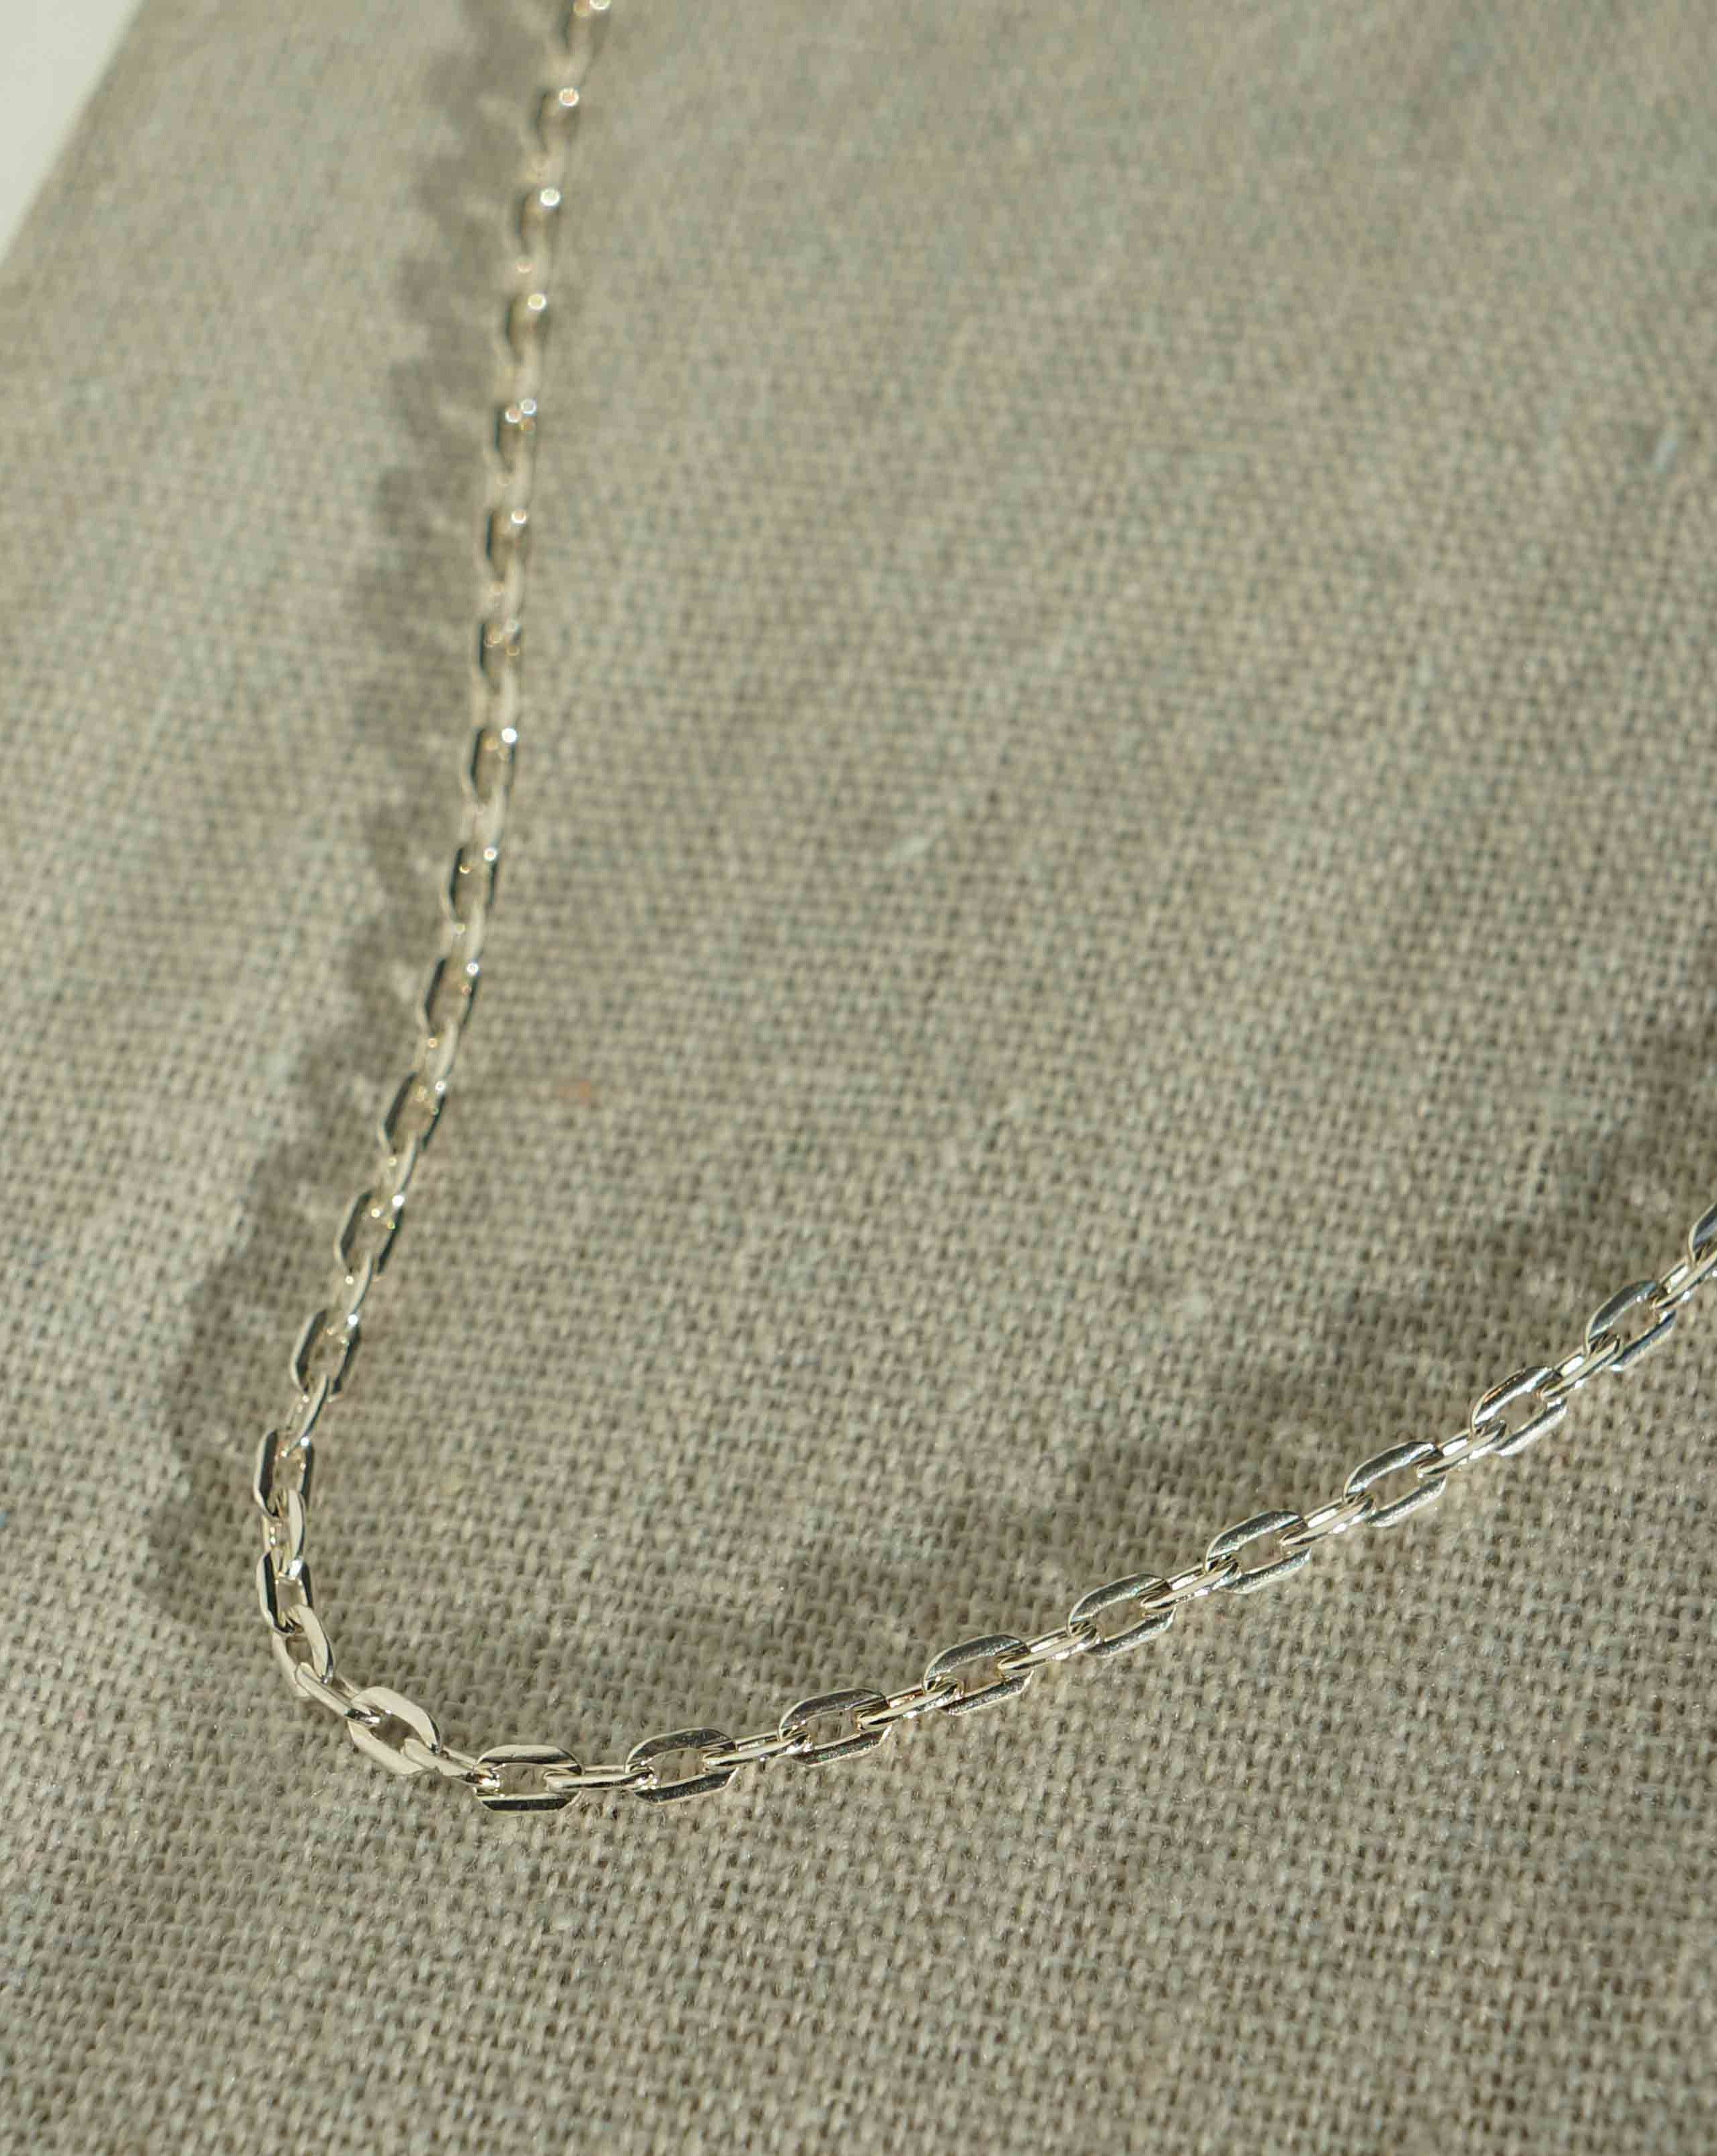 Garla Necklace by KOZAKH. A 14 to 16 inch adjustable length necklace in Sterling Silver.